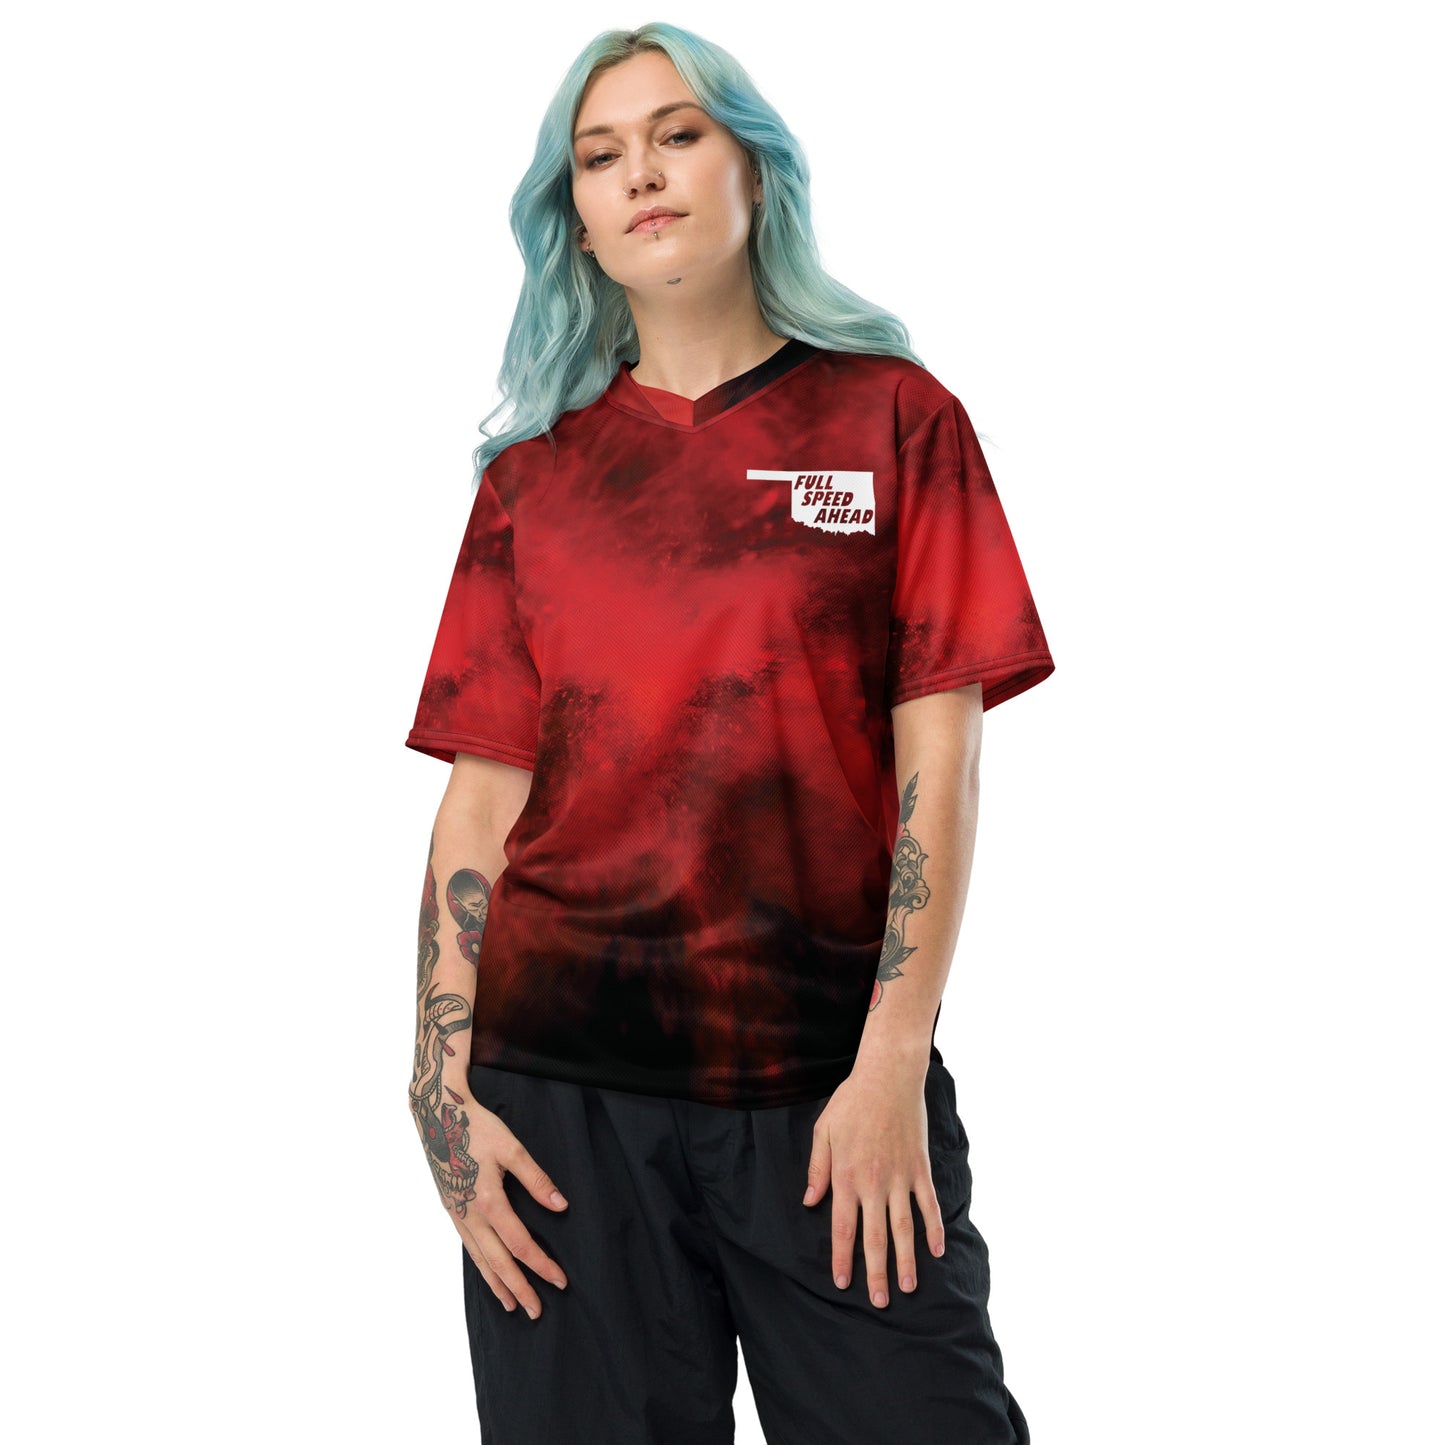 FULL SPEED AHEAD Recycled unisex sports jersey - A